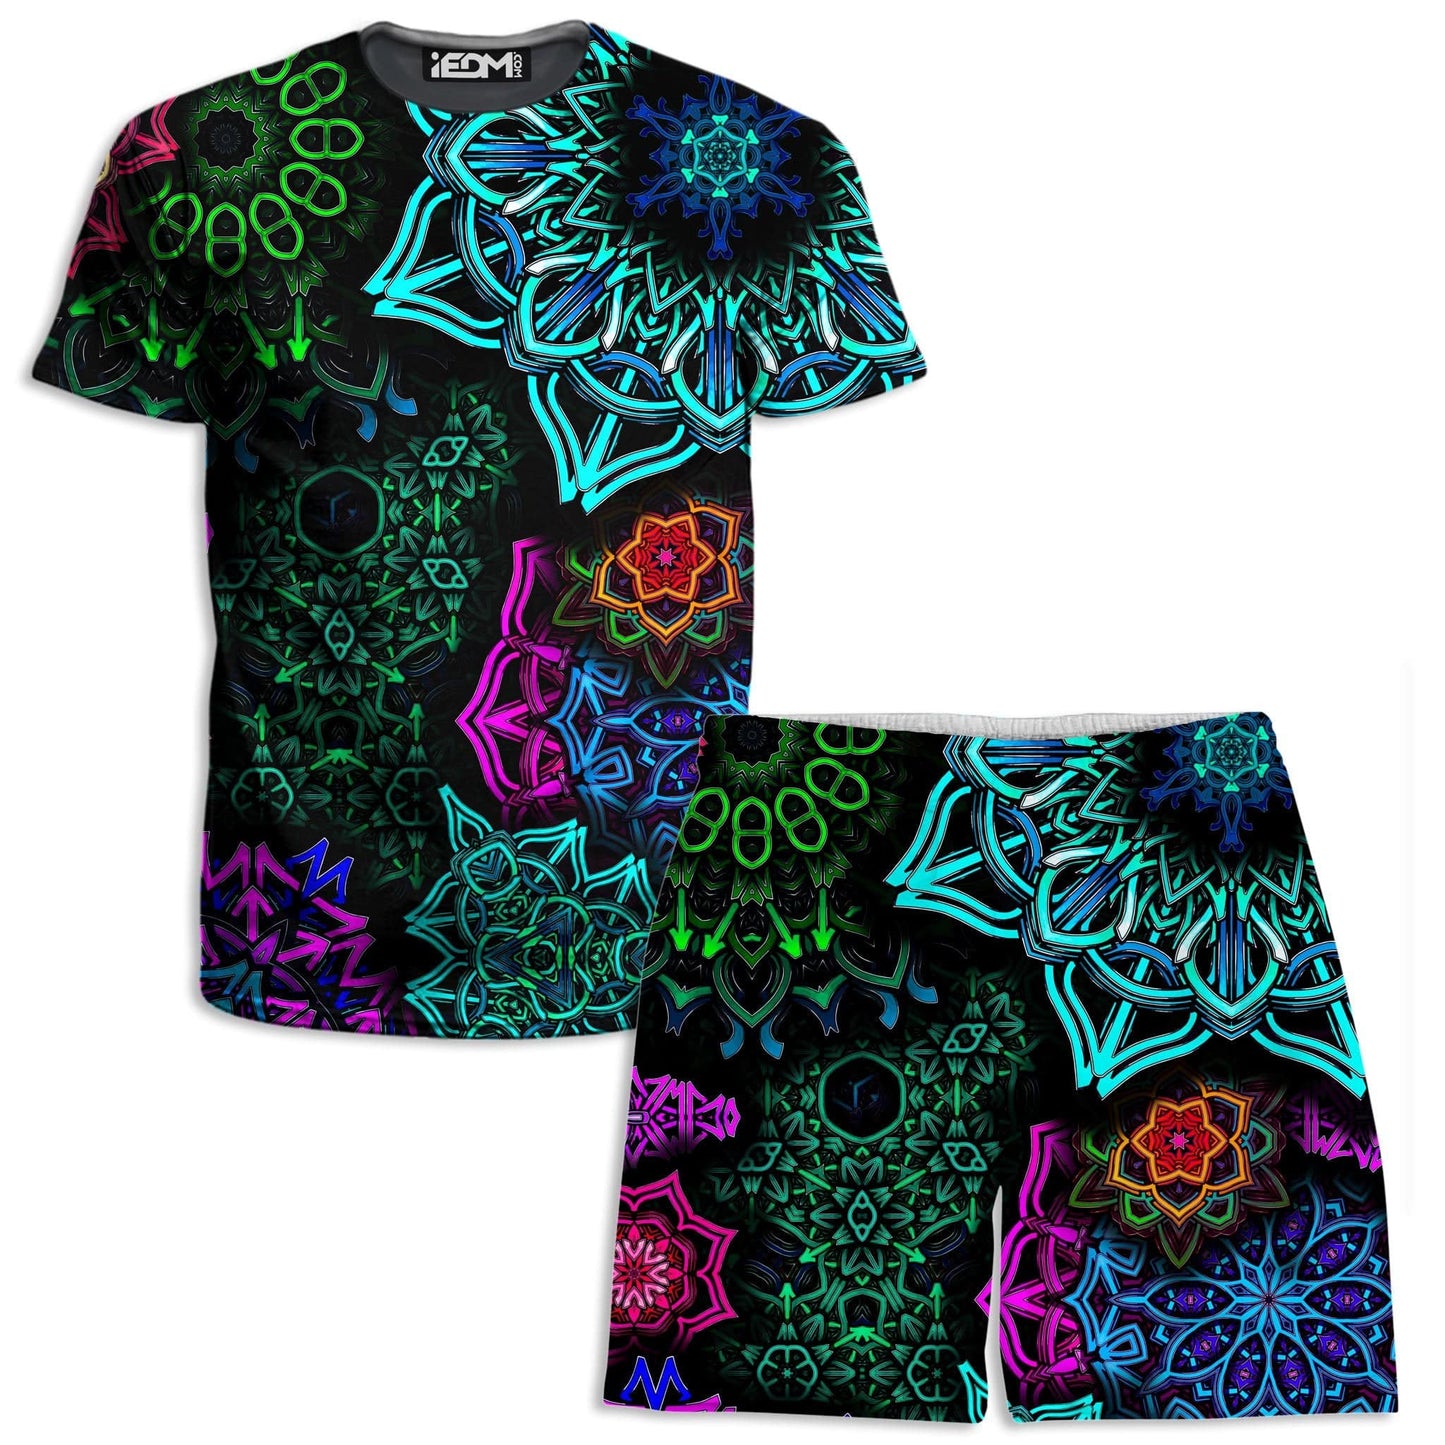 Space Invasion T-Shirt and Shorts Combo, Jan Kruse, | iEDM